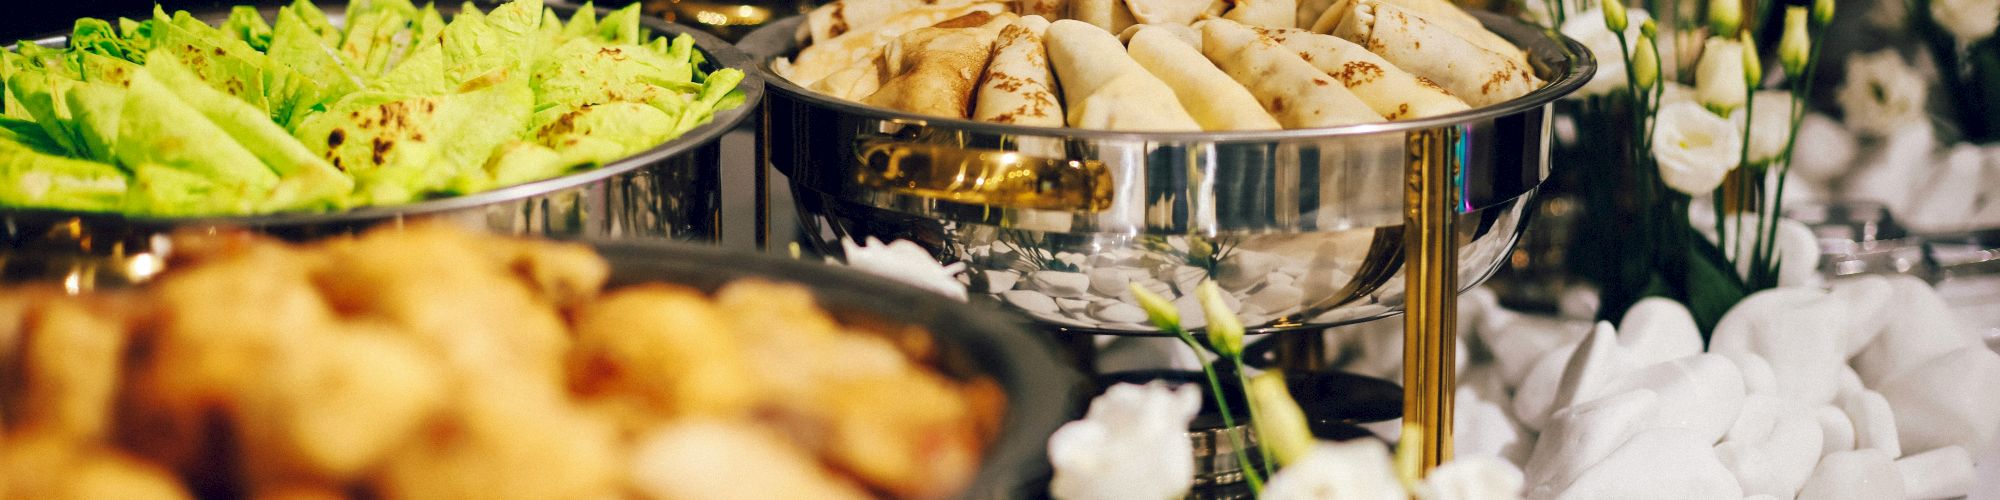 The image shows a buffet setup with various dishes in metal containers, including spring rolls and leafy greens, surrounded by white decorations.